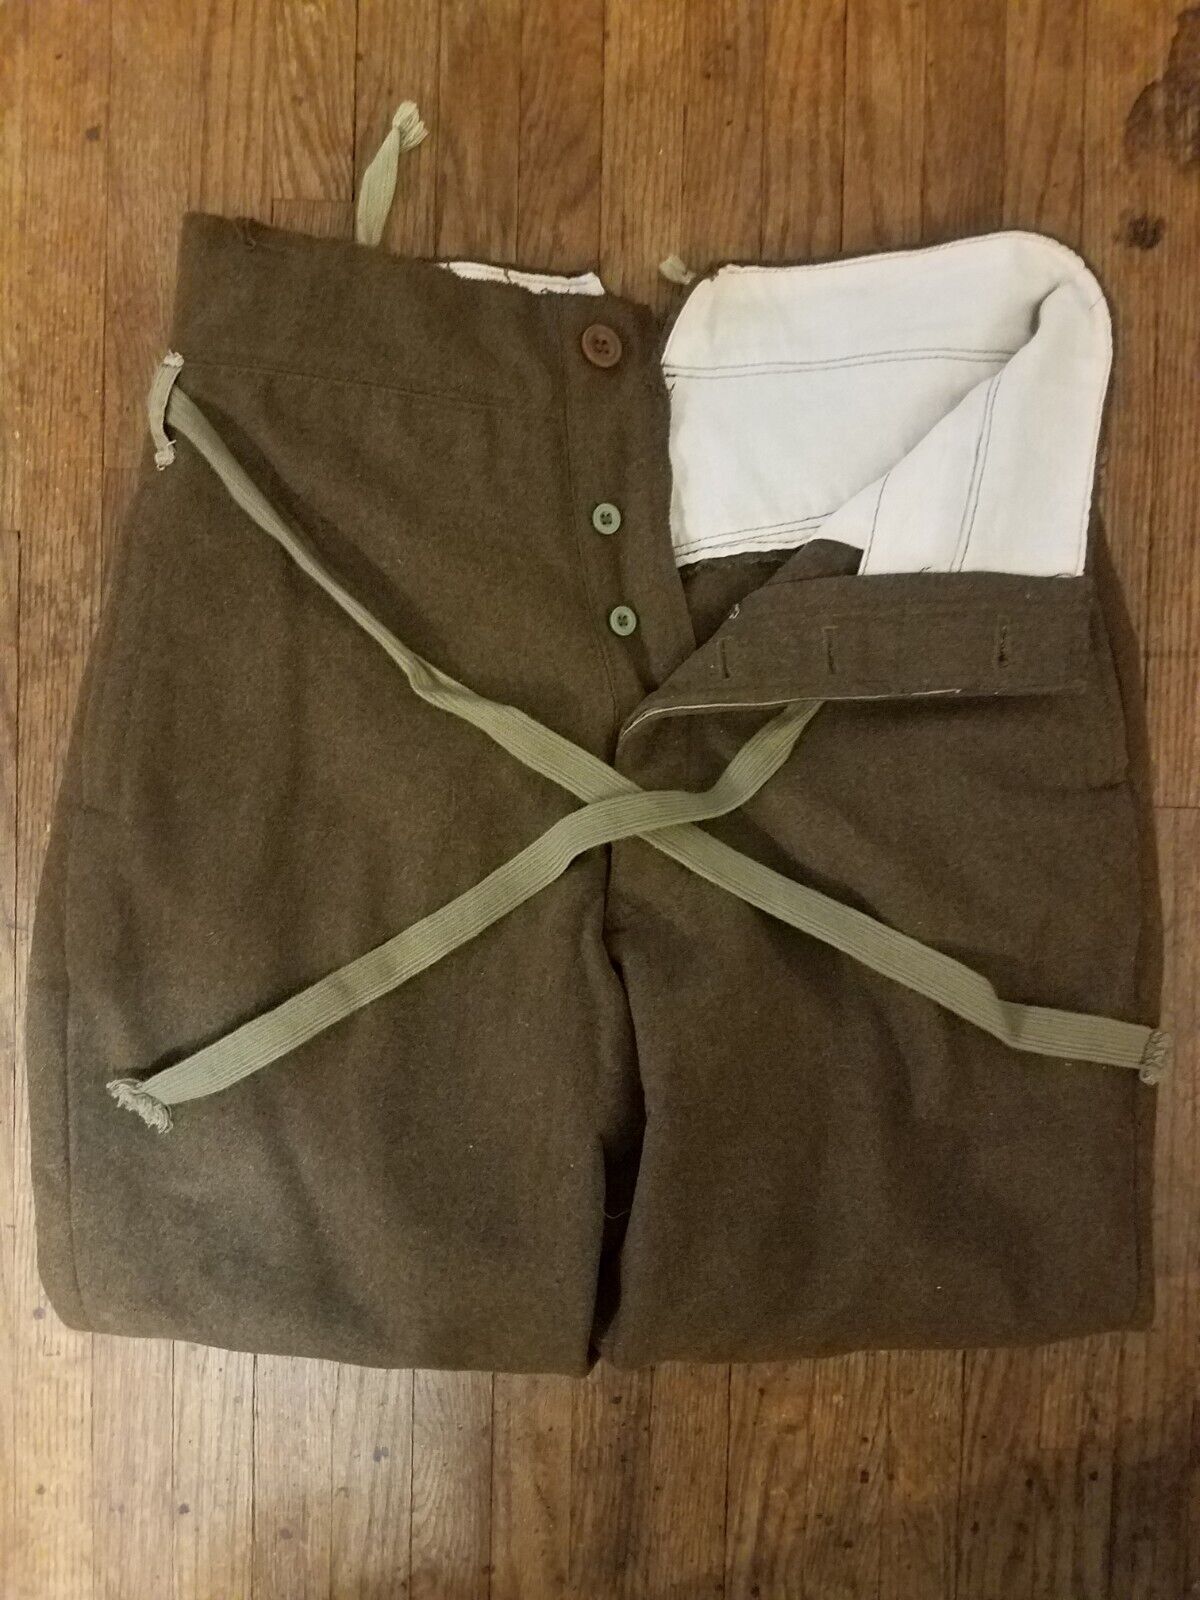 Imperial Japanese Army Type 3trousers (Repro.)